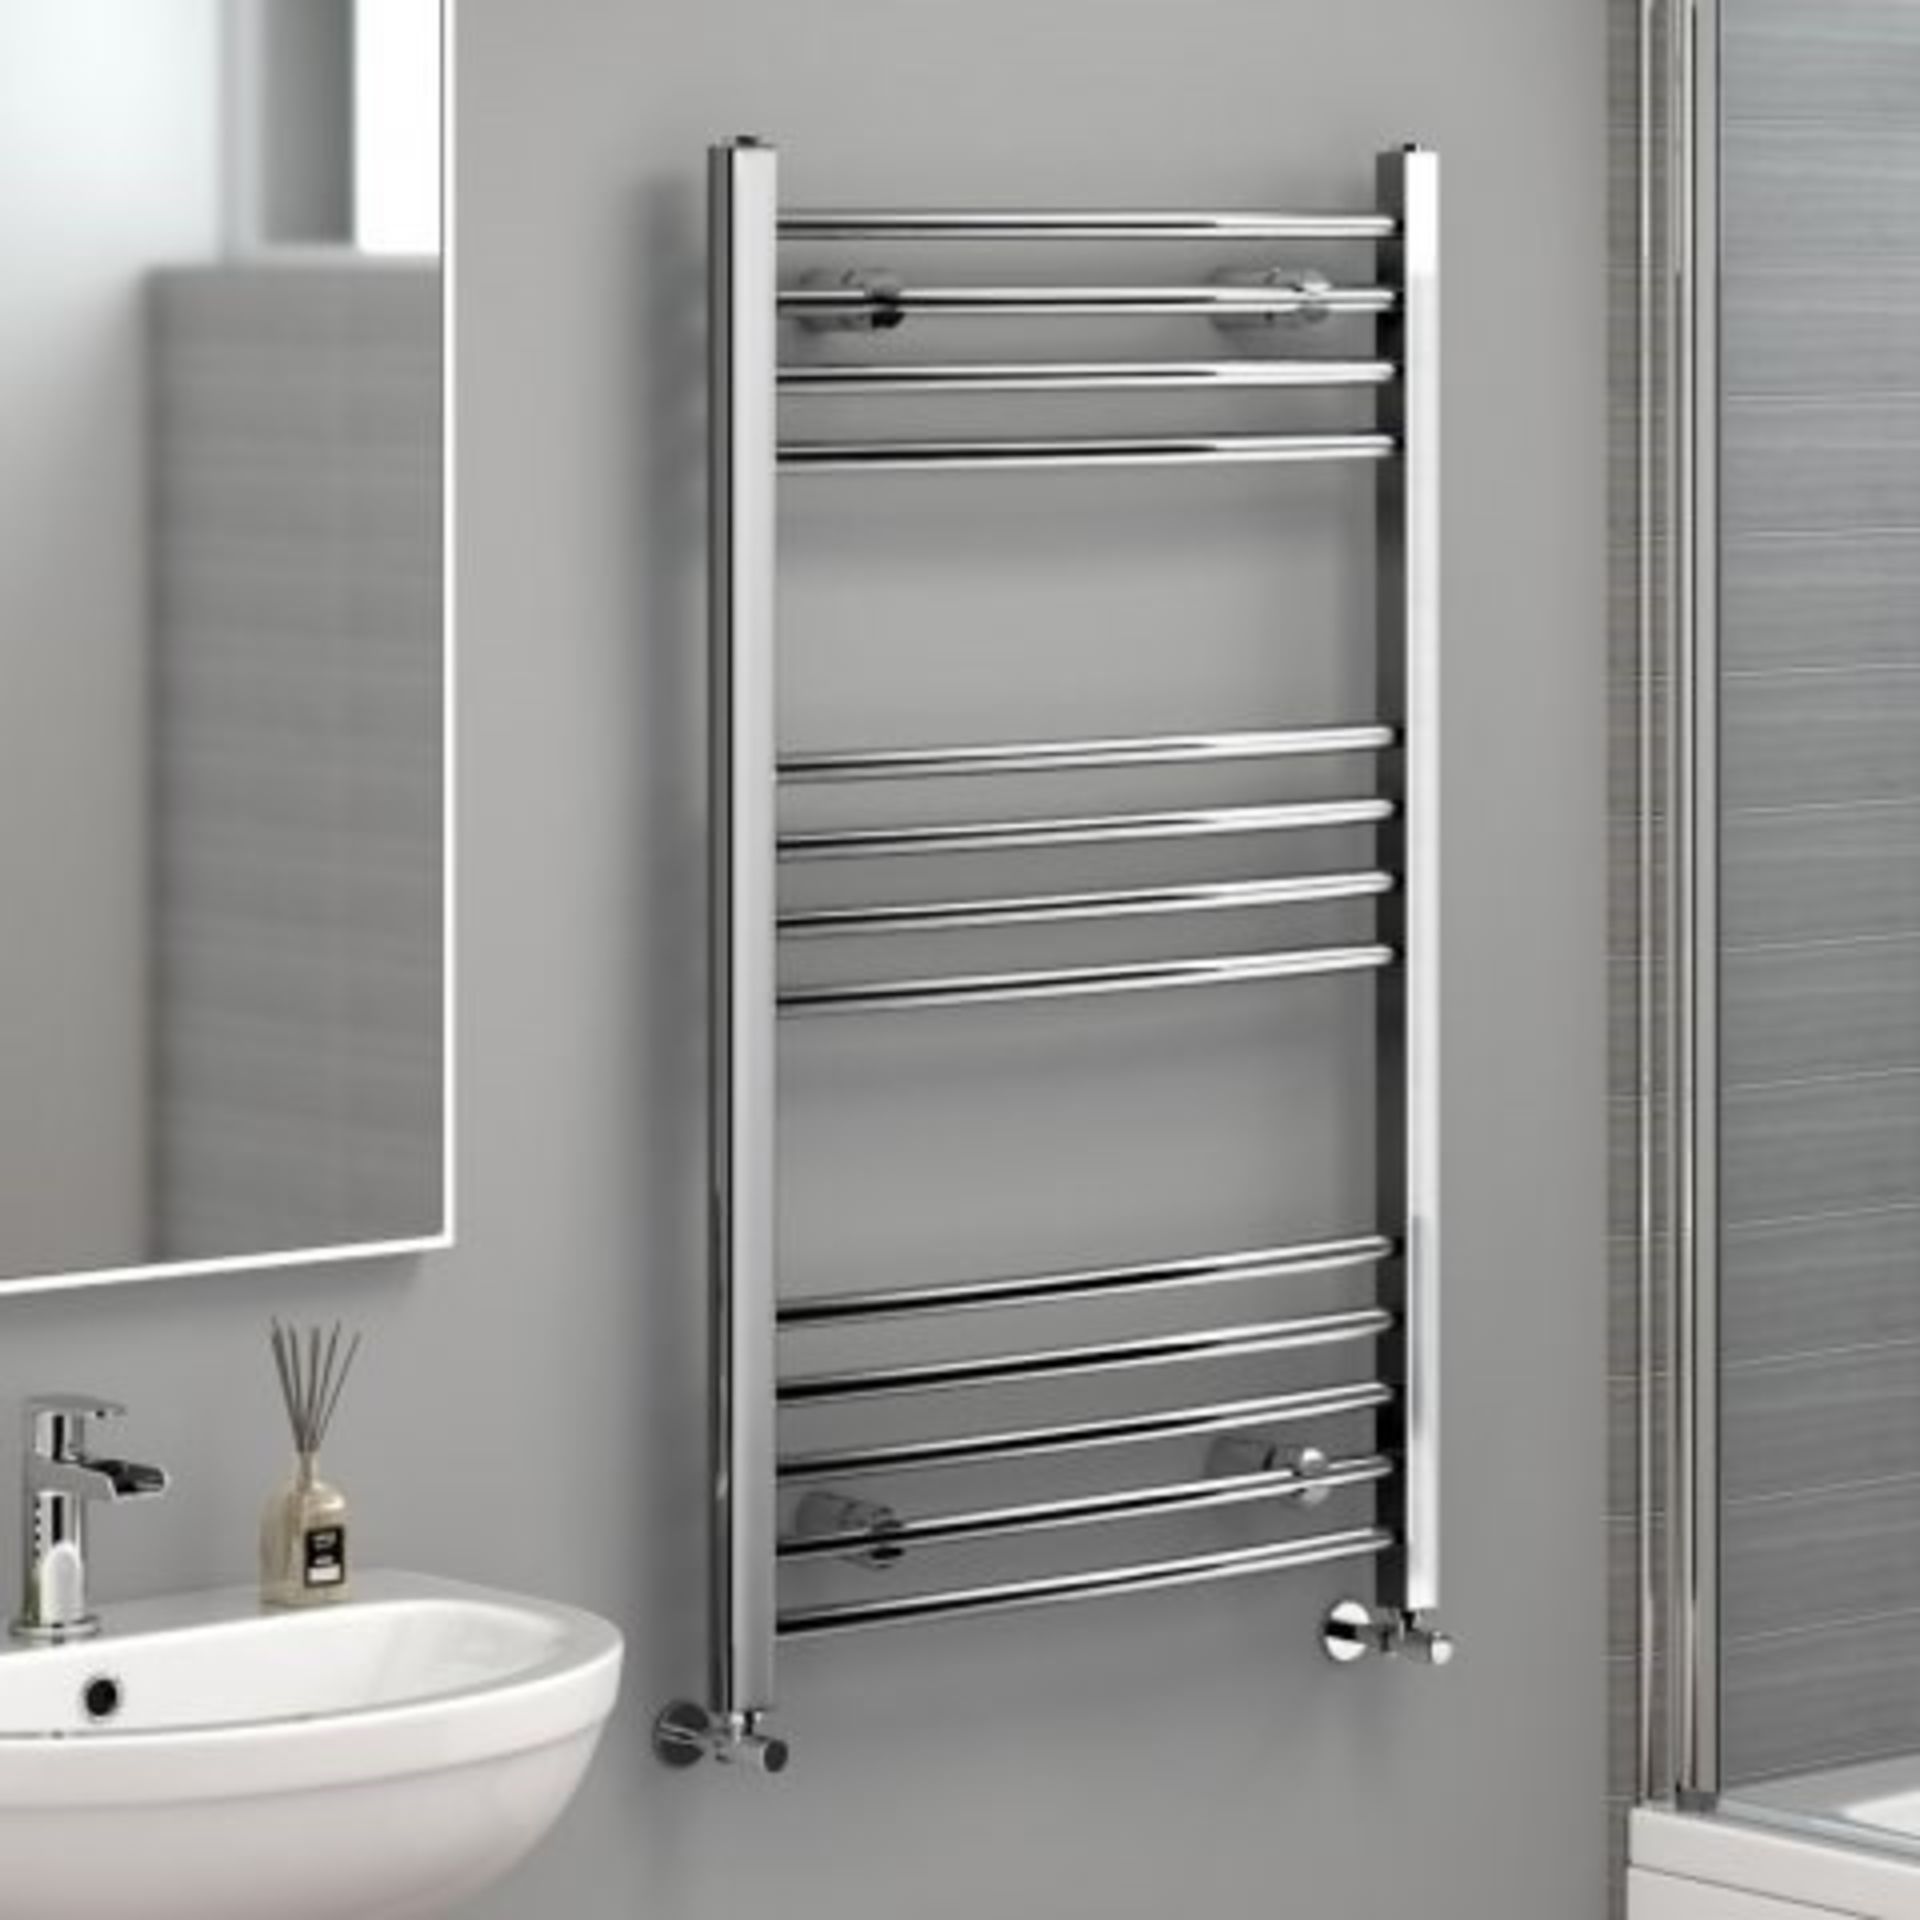 NEW & BOXED 1200x600mm - 20mm Tubes - RRP £219.99.Chrome Curved Rail Ladder Towel Radiator. O...